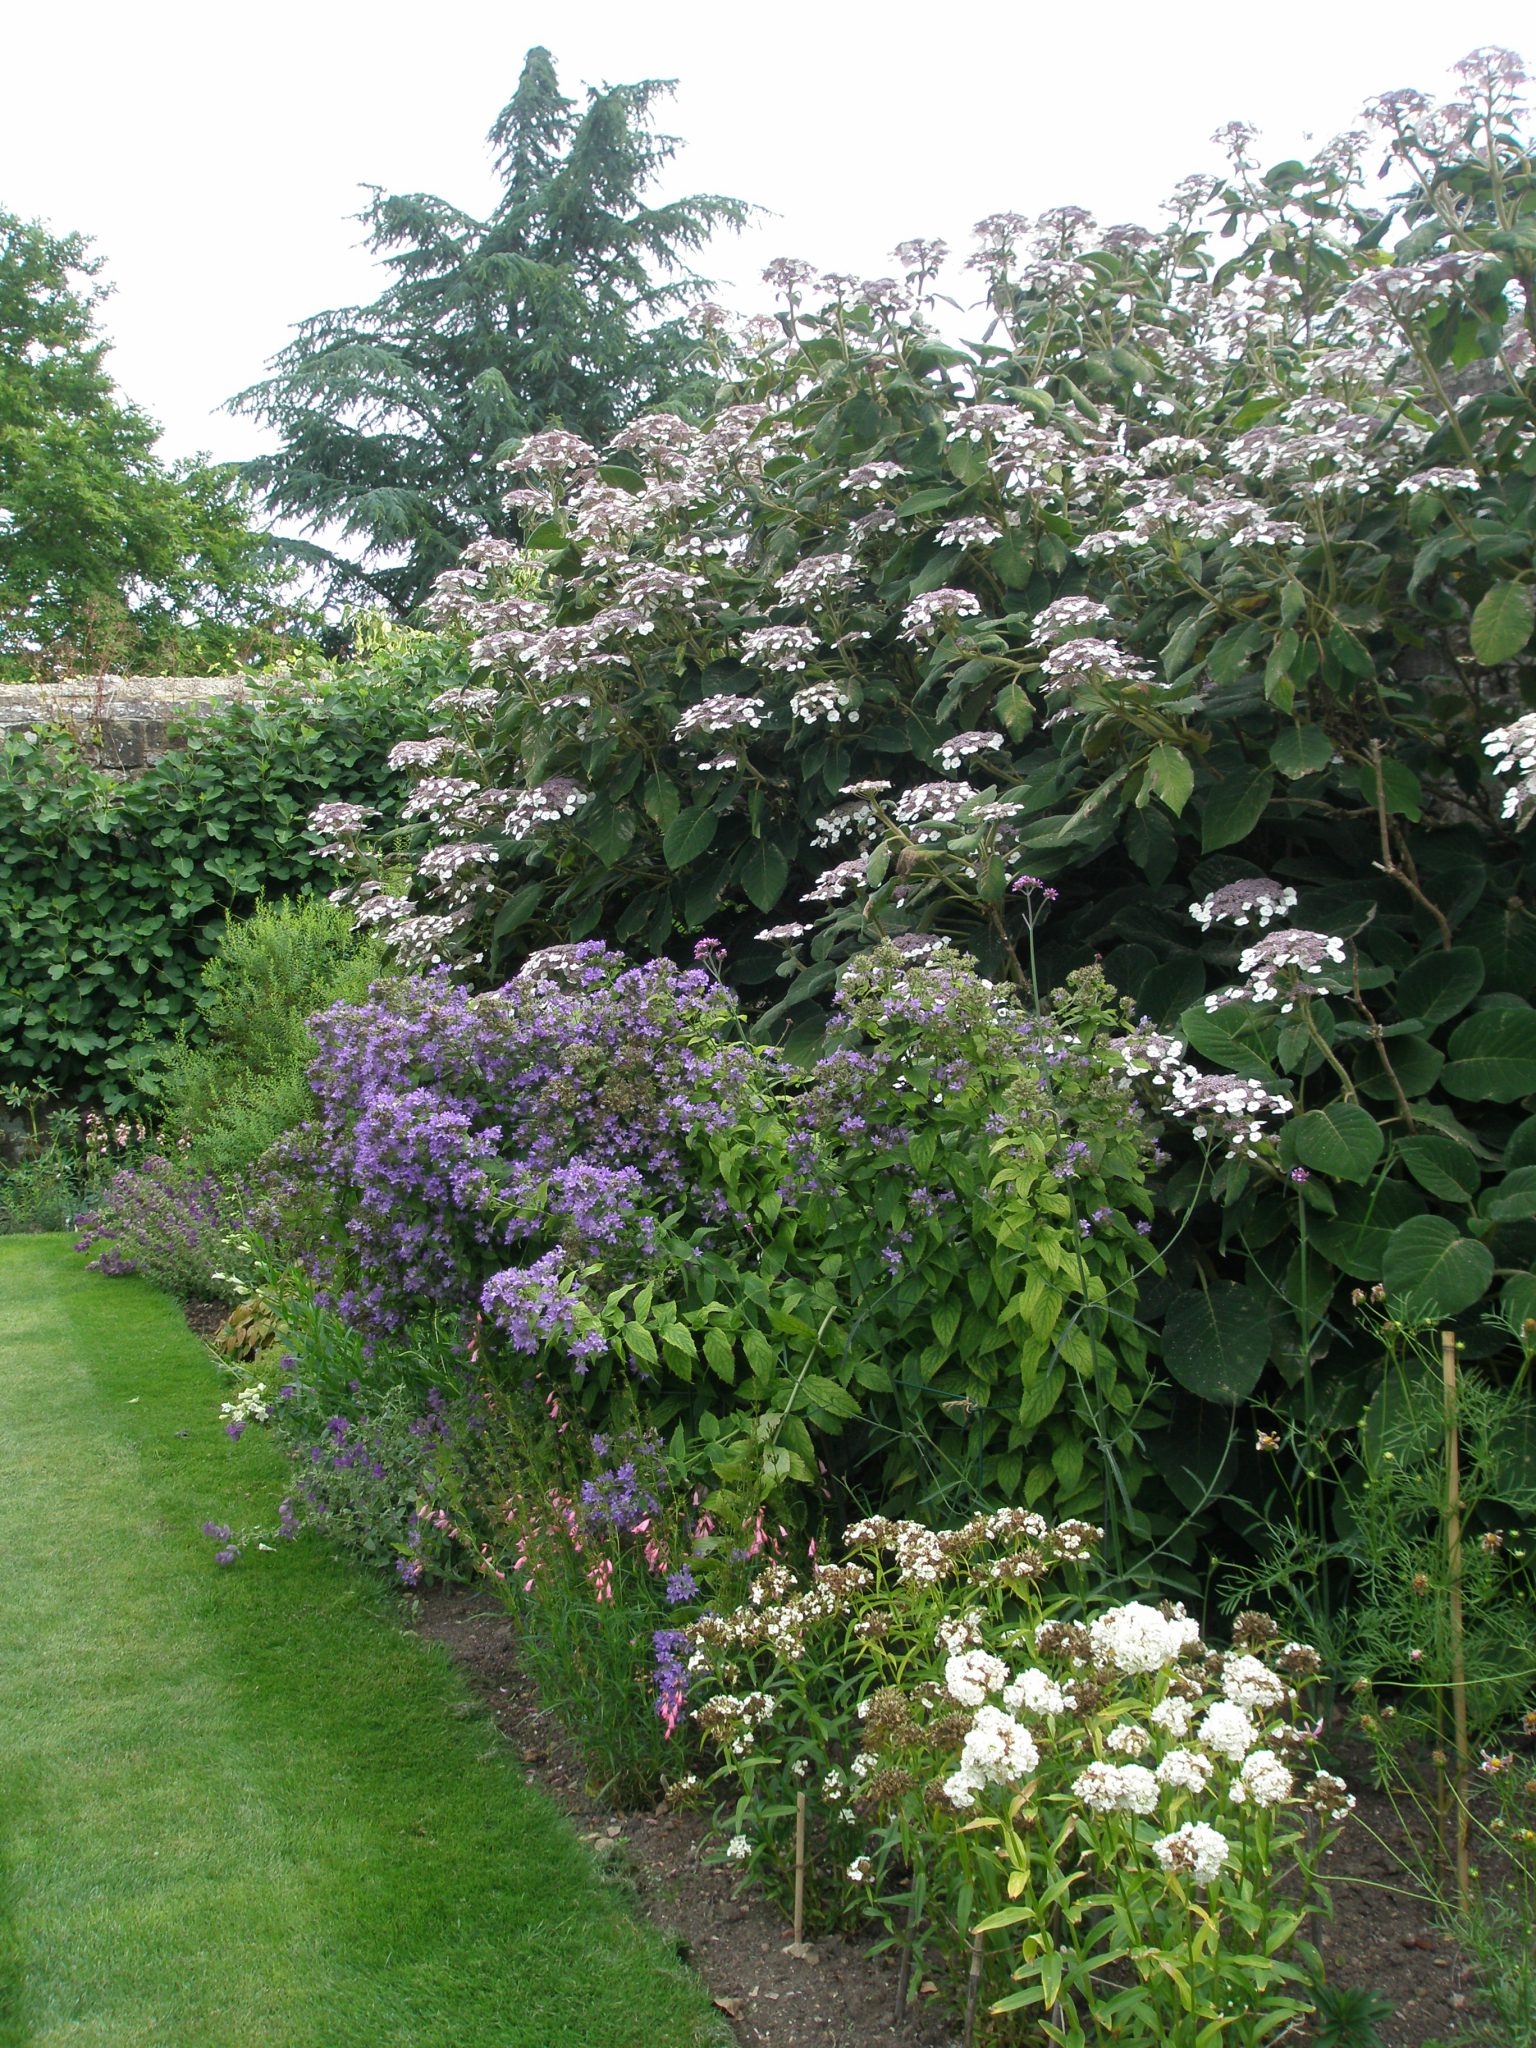 Mixed Borders of plants with pastel blossoms hug the inner perimeters of Lady Churchill's Rose Garden.